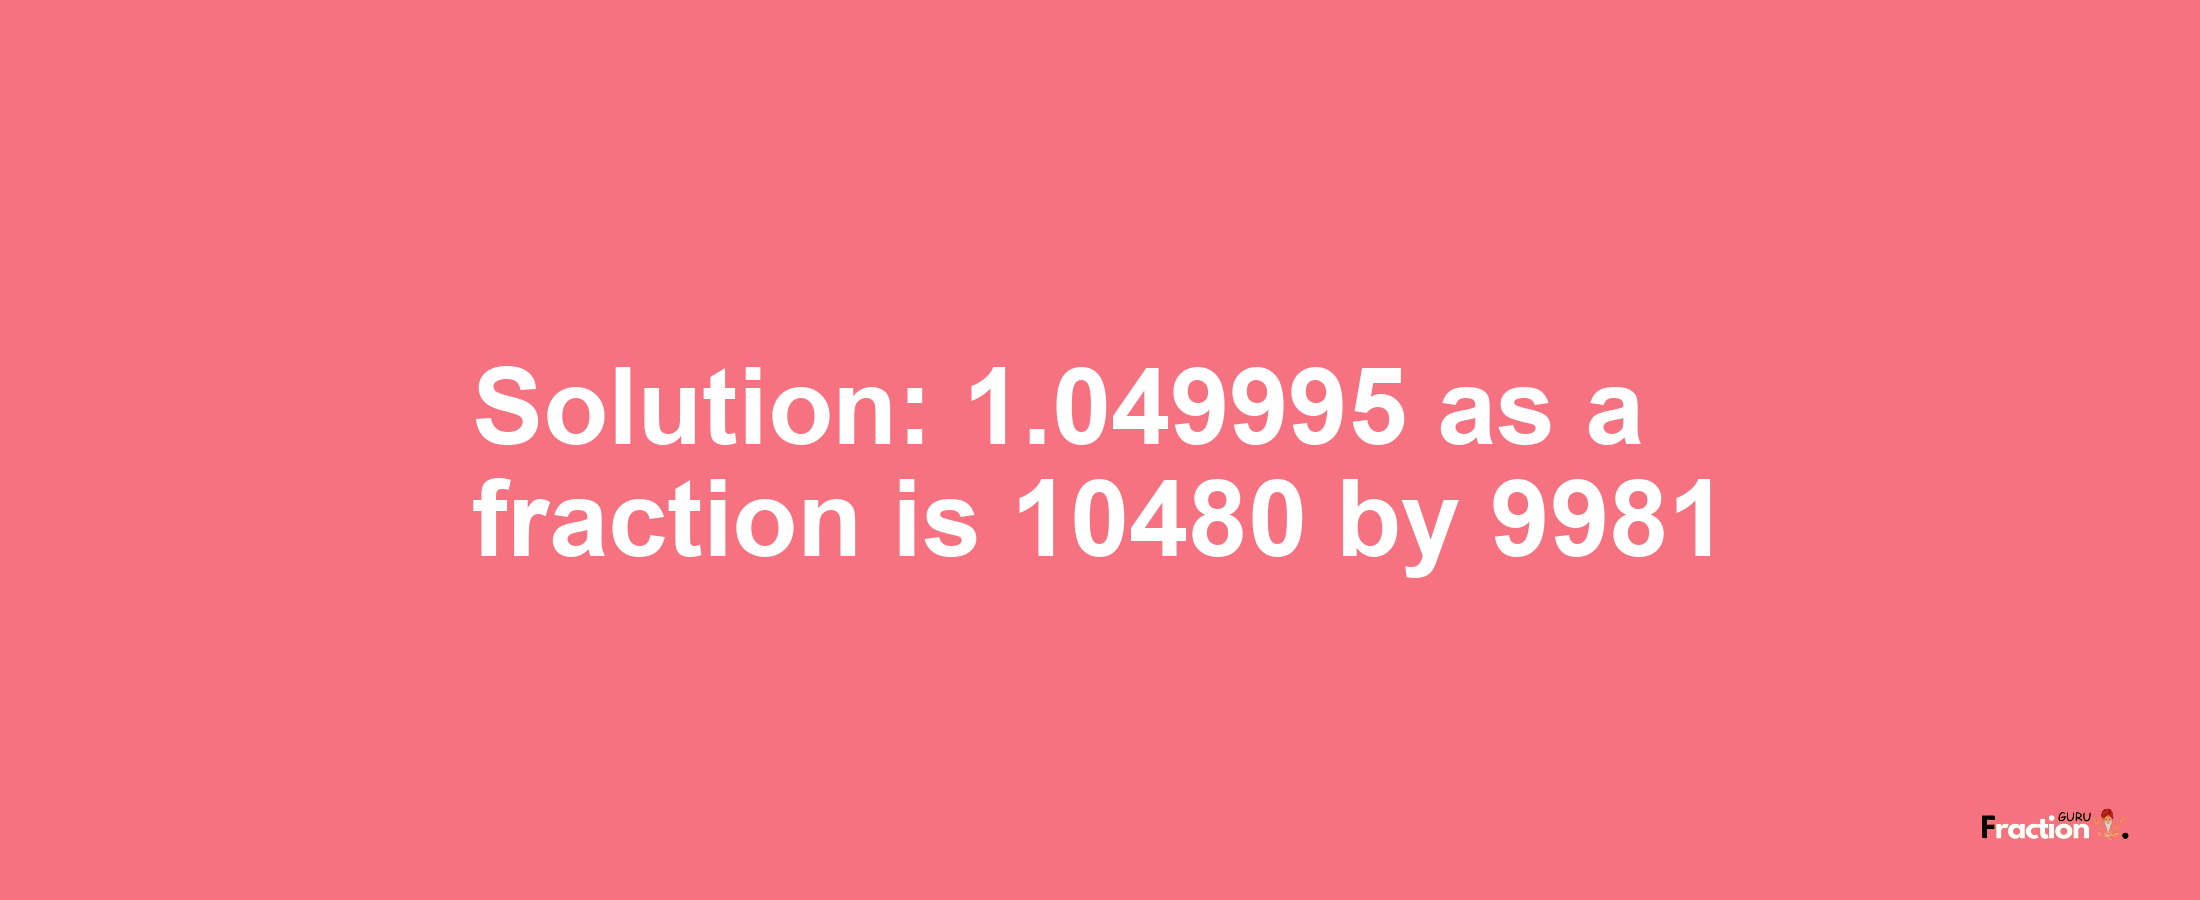 Solution:1.049995 as a fraction is 10480/9981